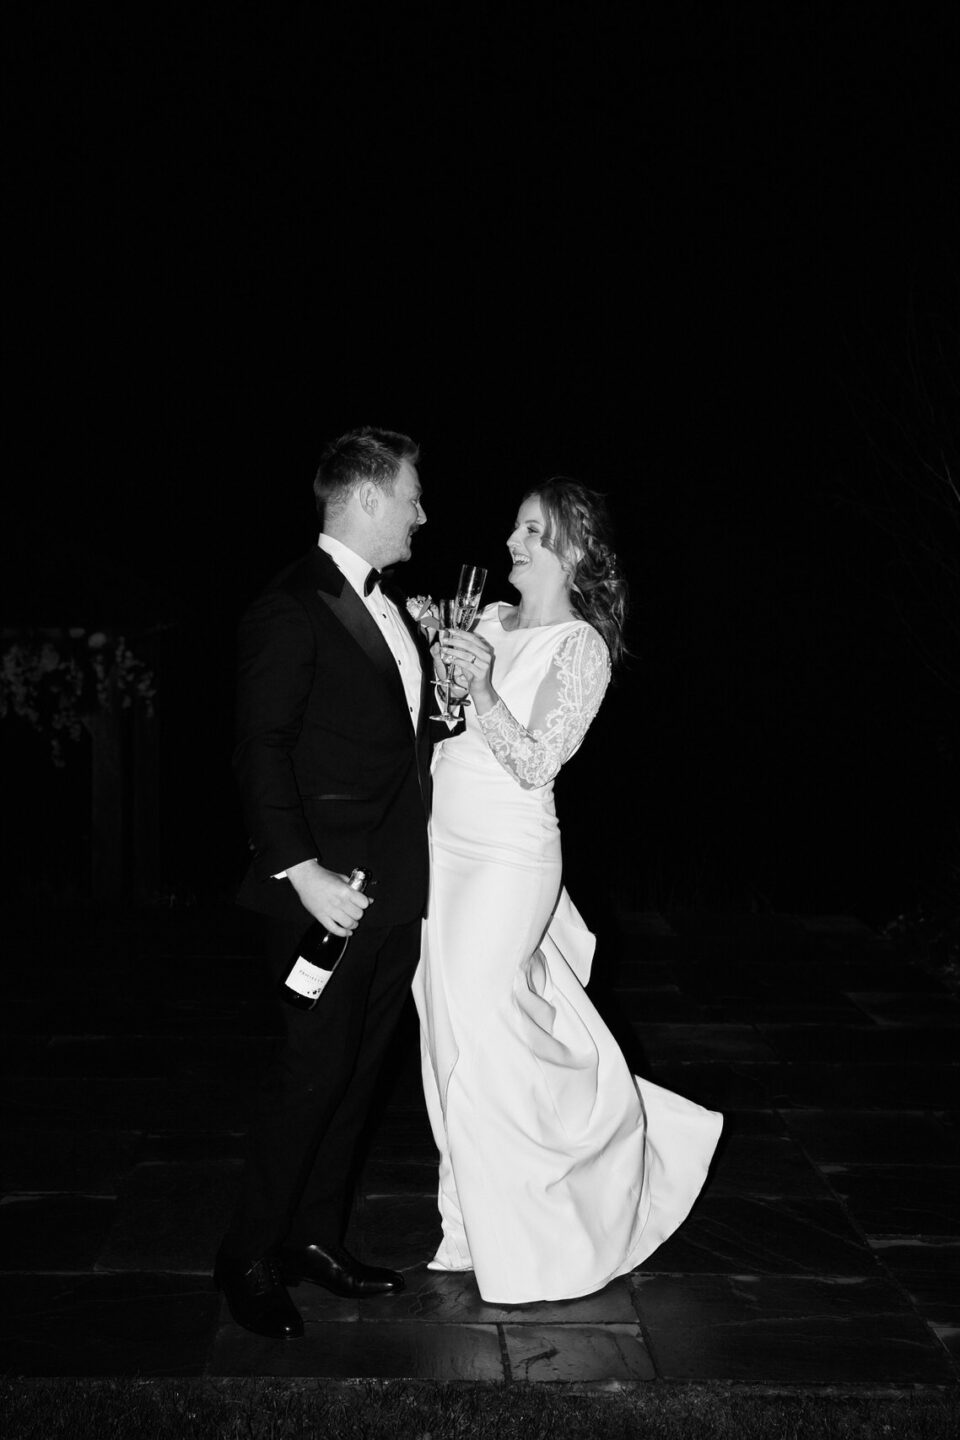 A nighttime picture of a bride and groom in black and white.